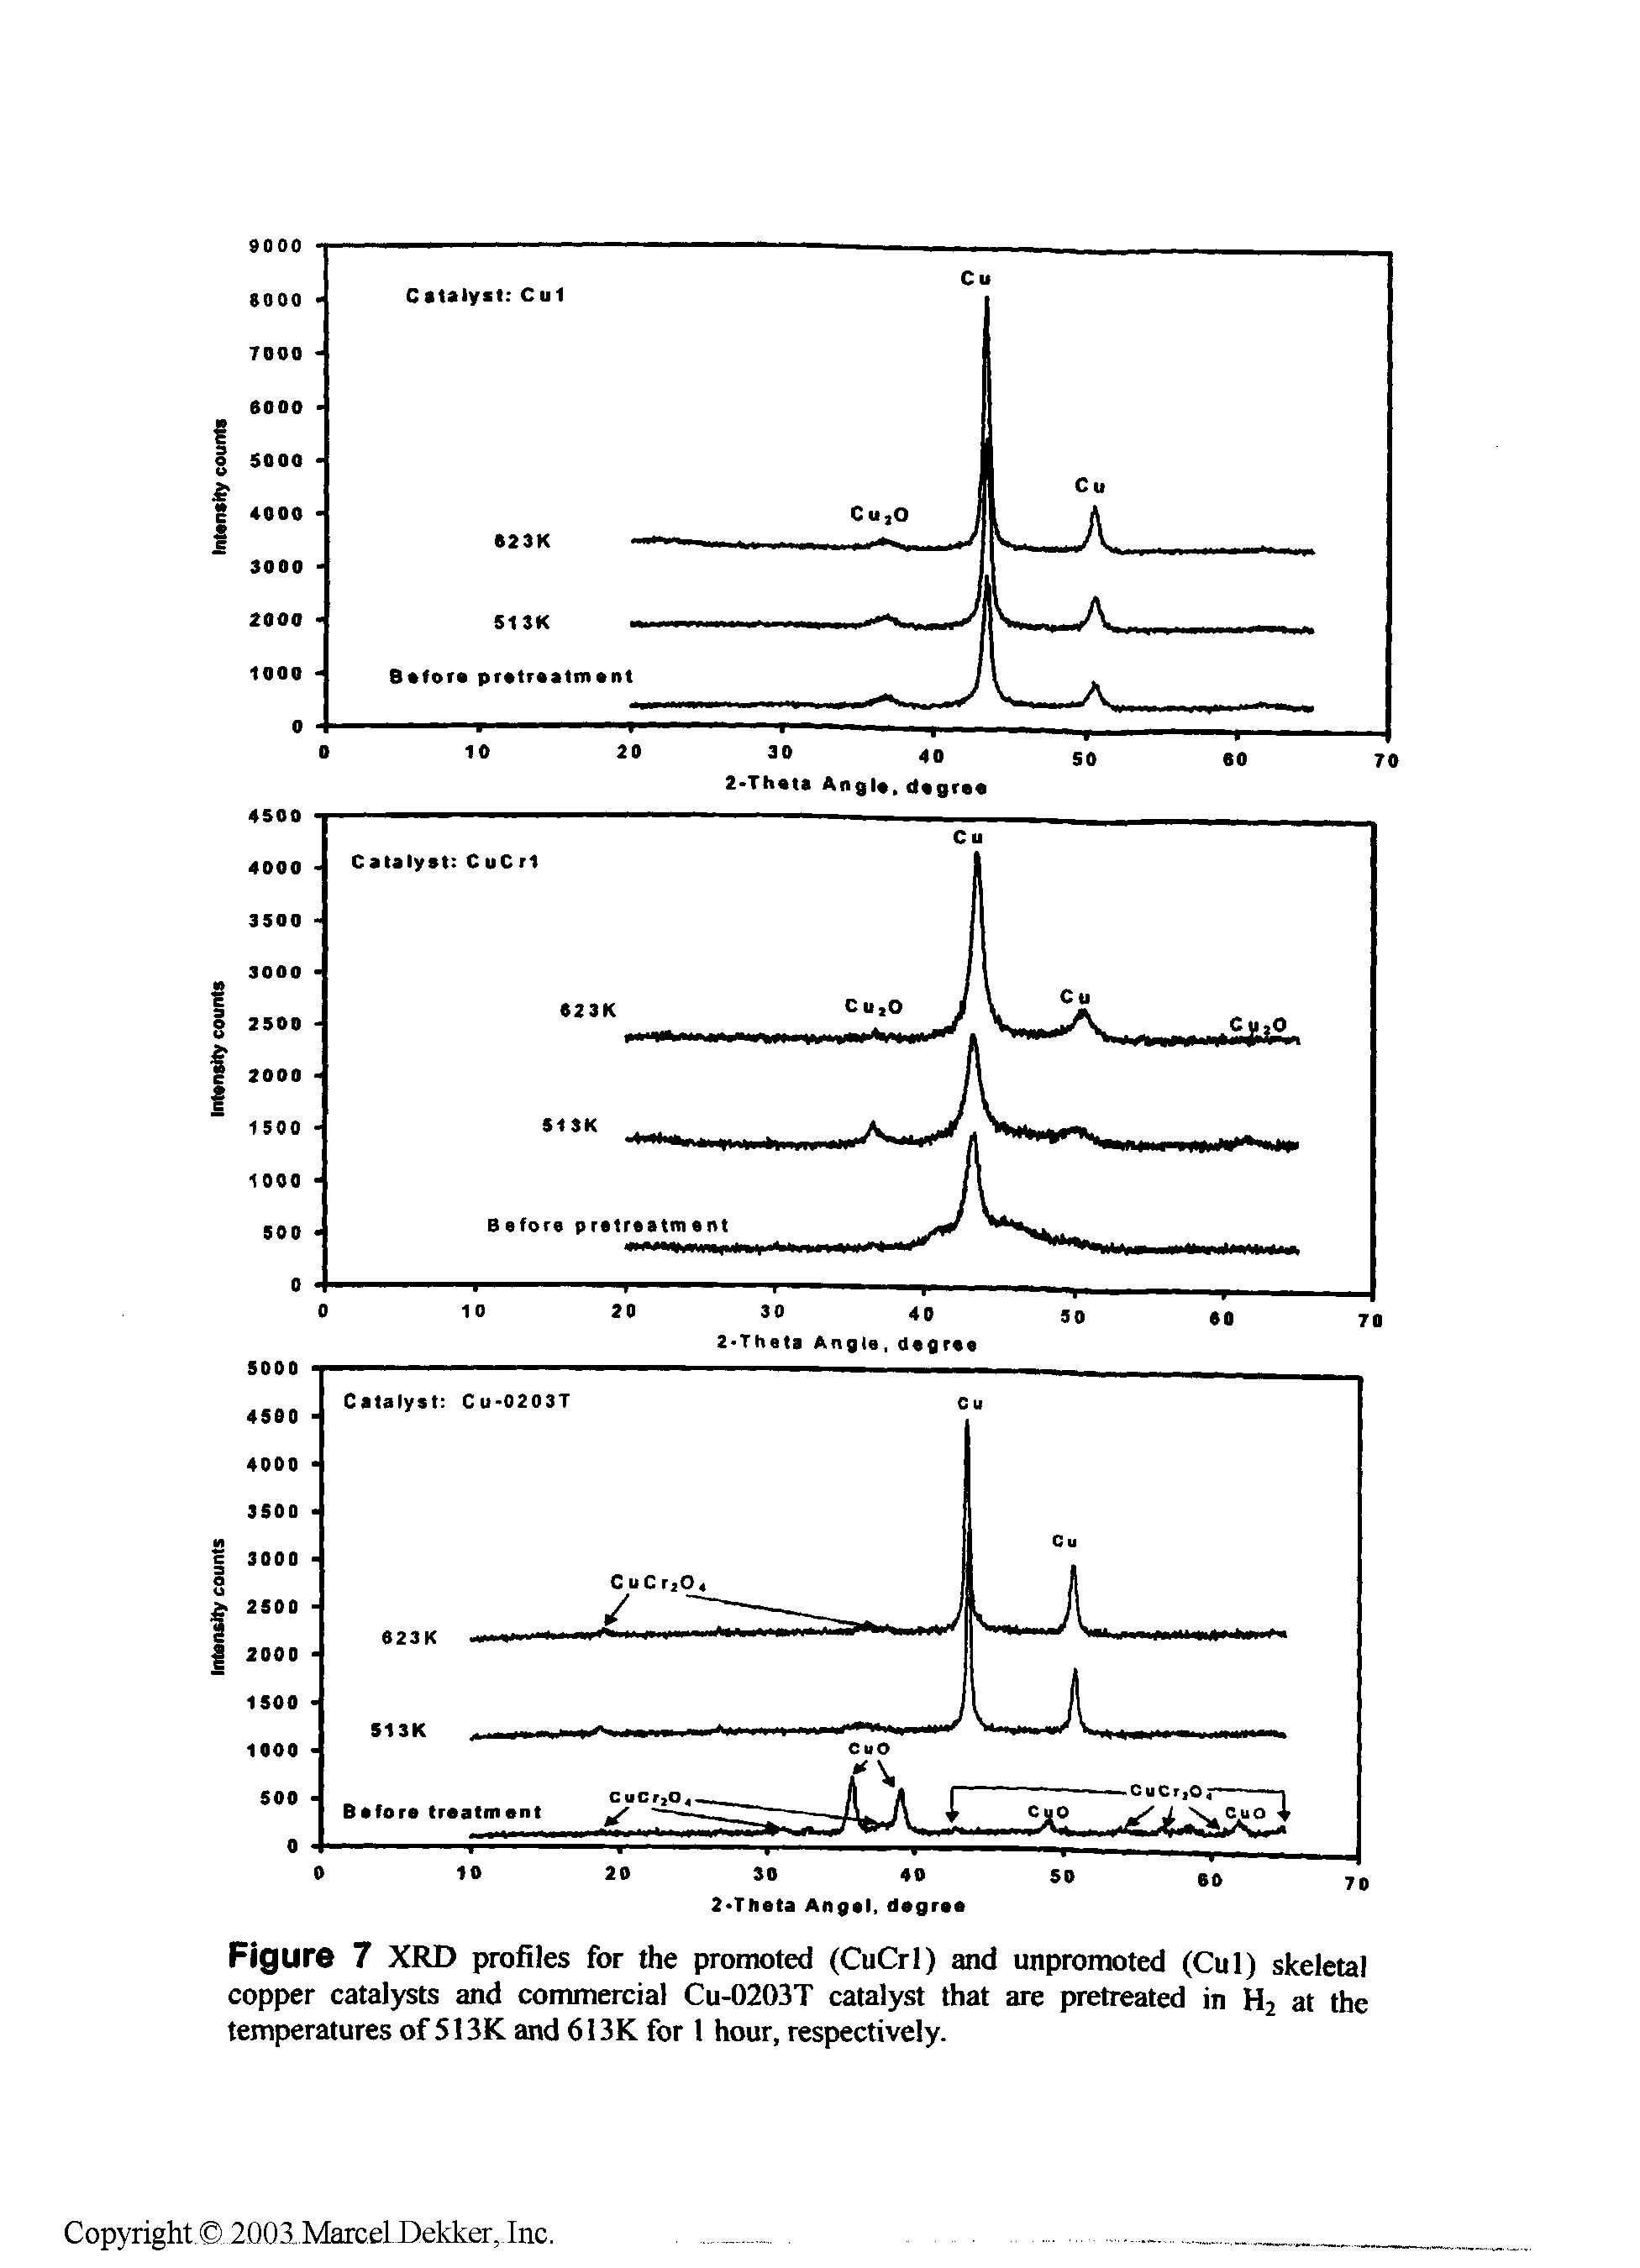 Figure 7 XRD profiles for the promoted (CuCrl) and unpromoted (Cul) skeletal copper catalysts and commercial Cu-0203T catalyst that are pretreated in H2 at the temperatures of 513K and 613K for 1 hour, respectively.